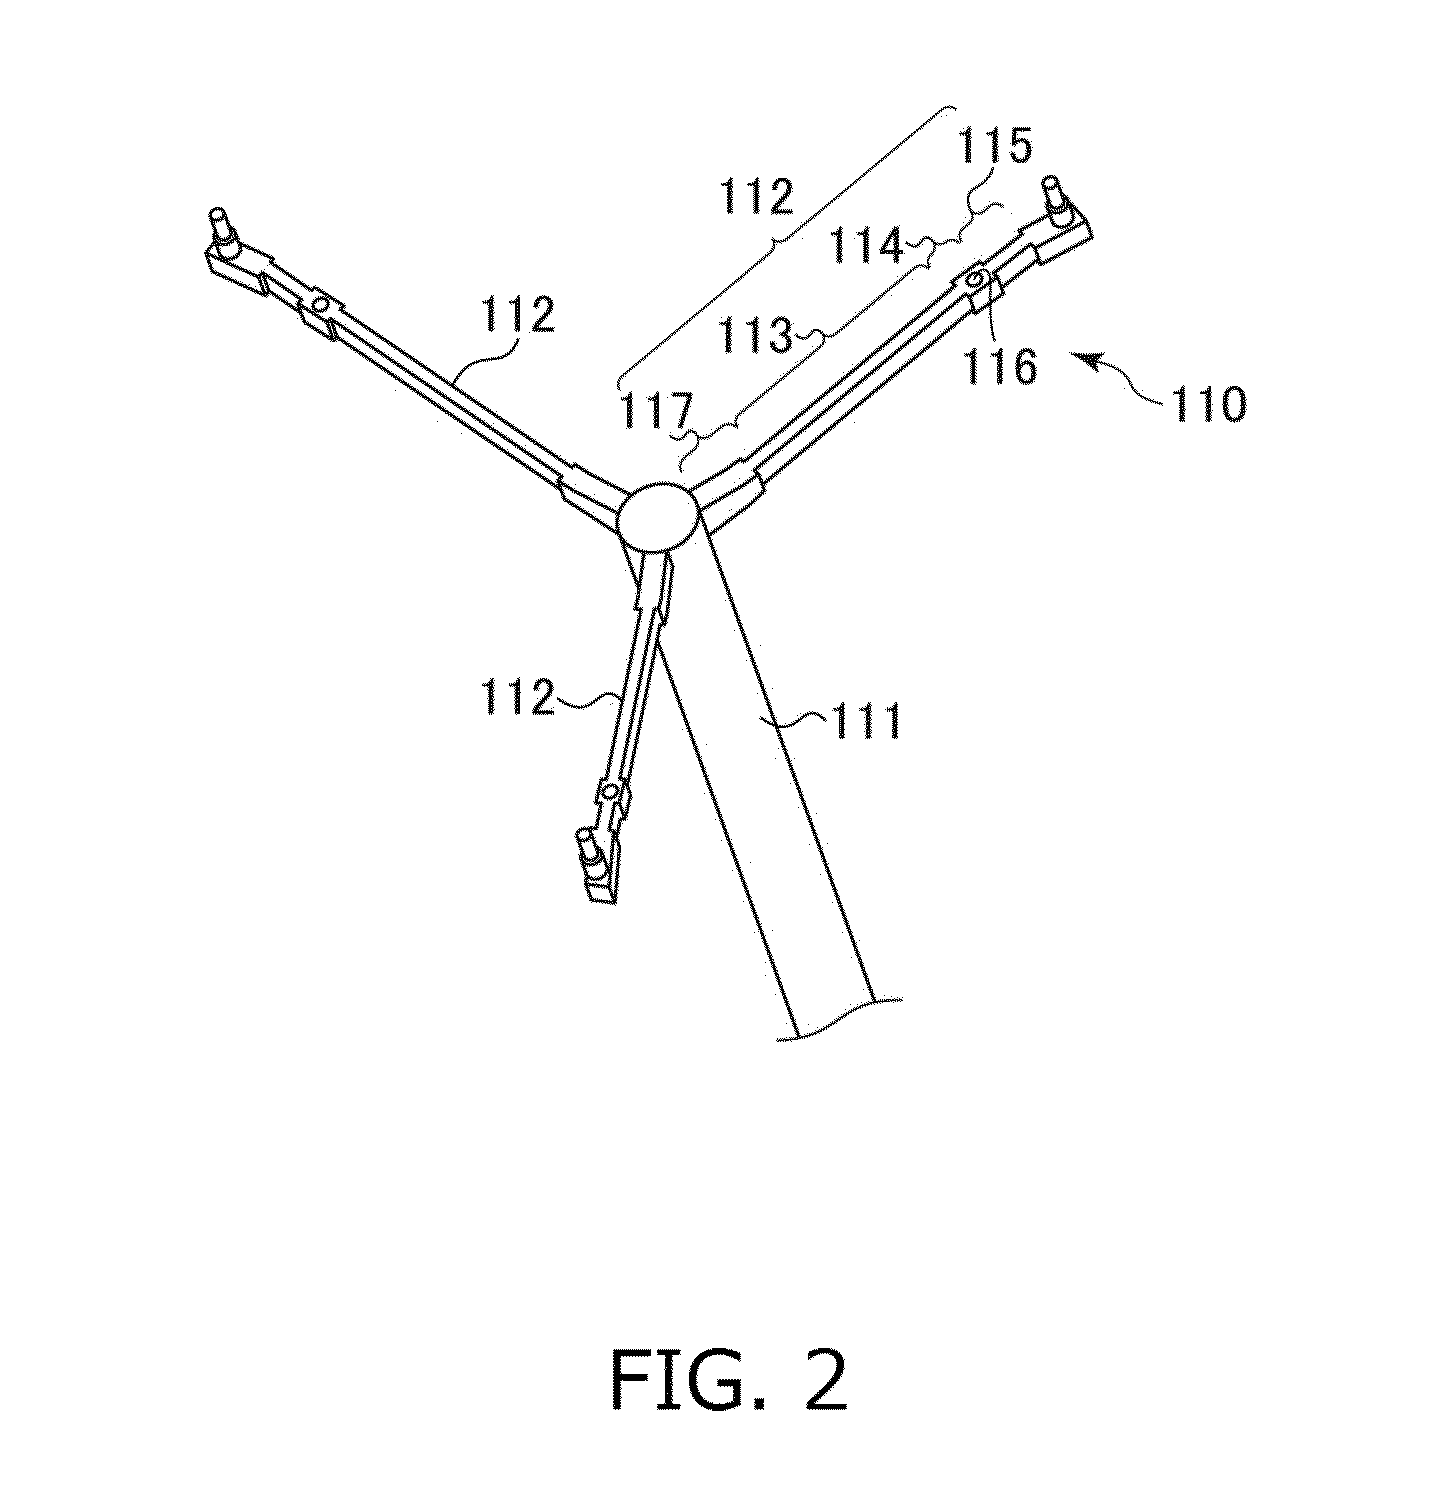 Susceptor Support Portion and Epitaxial Growth Apparatus Including Susceptor Support Portion